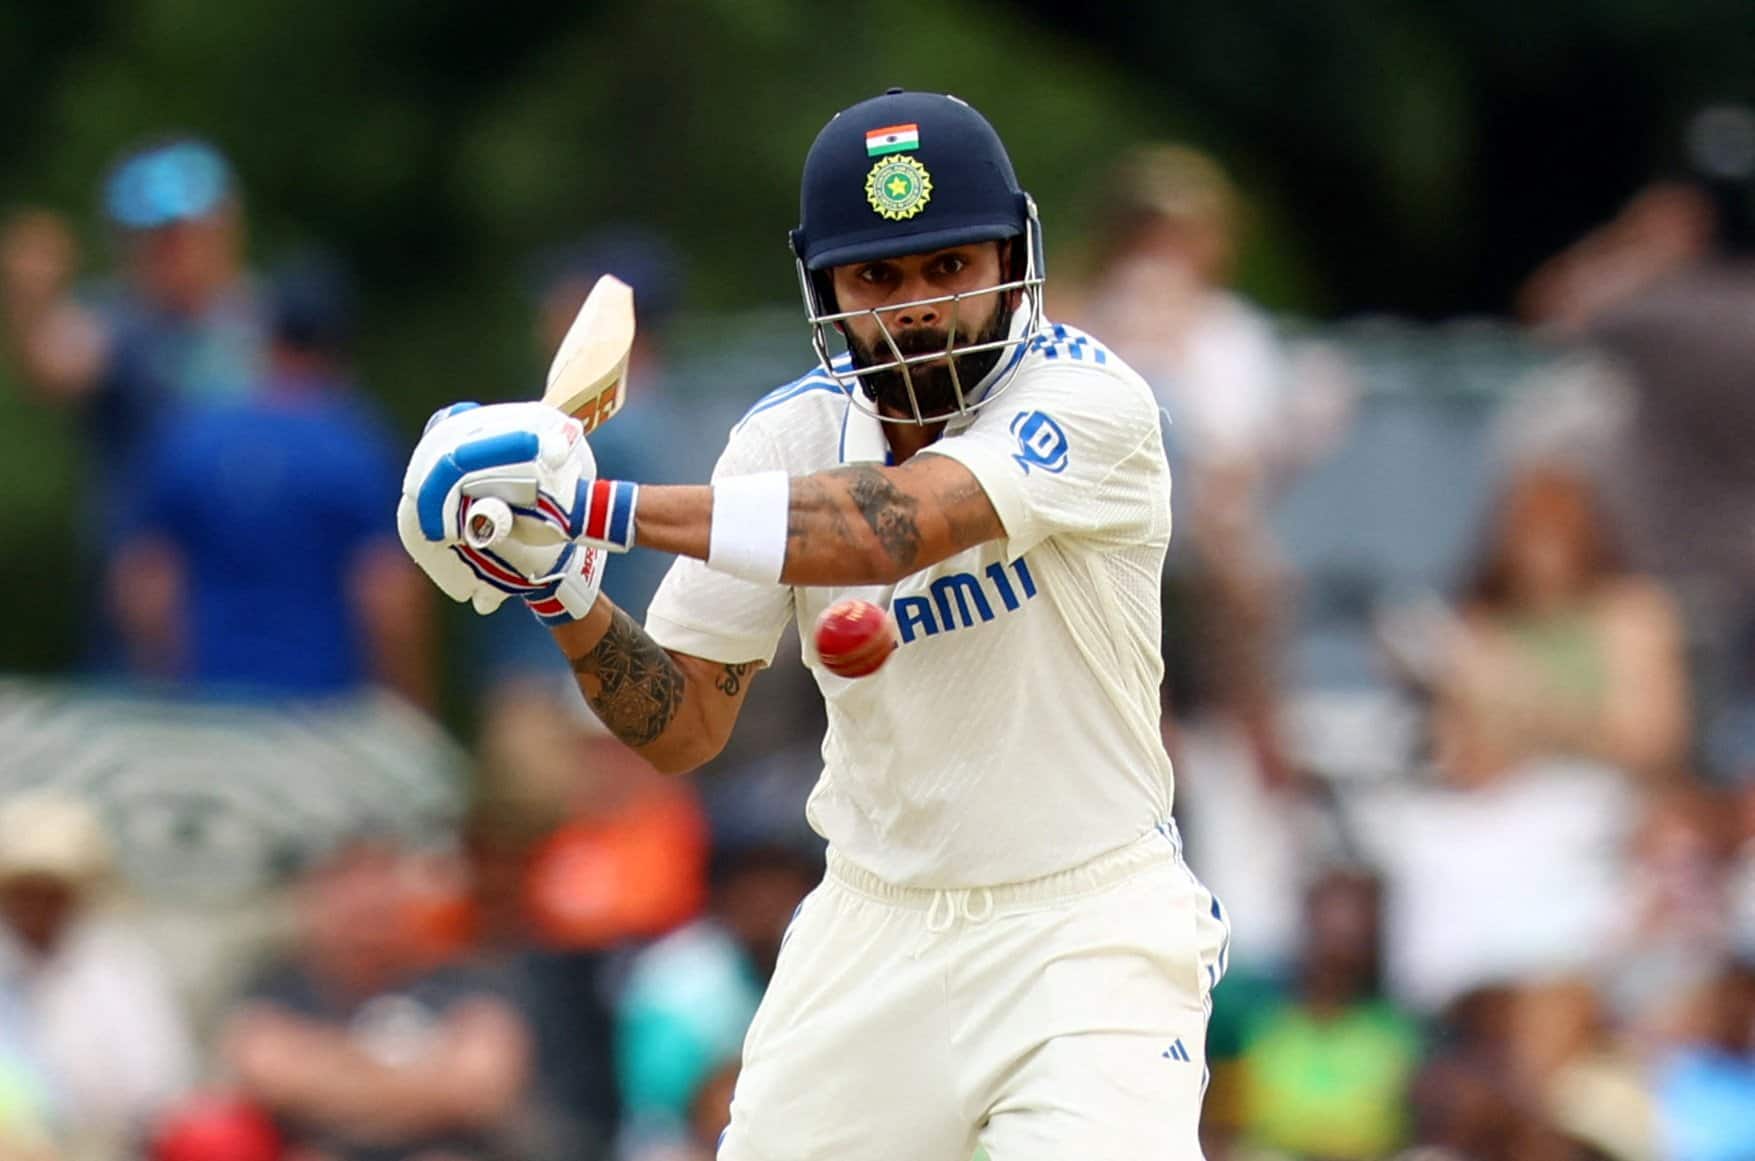 Top 5 Test Run-Getters For India In Tests